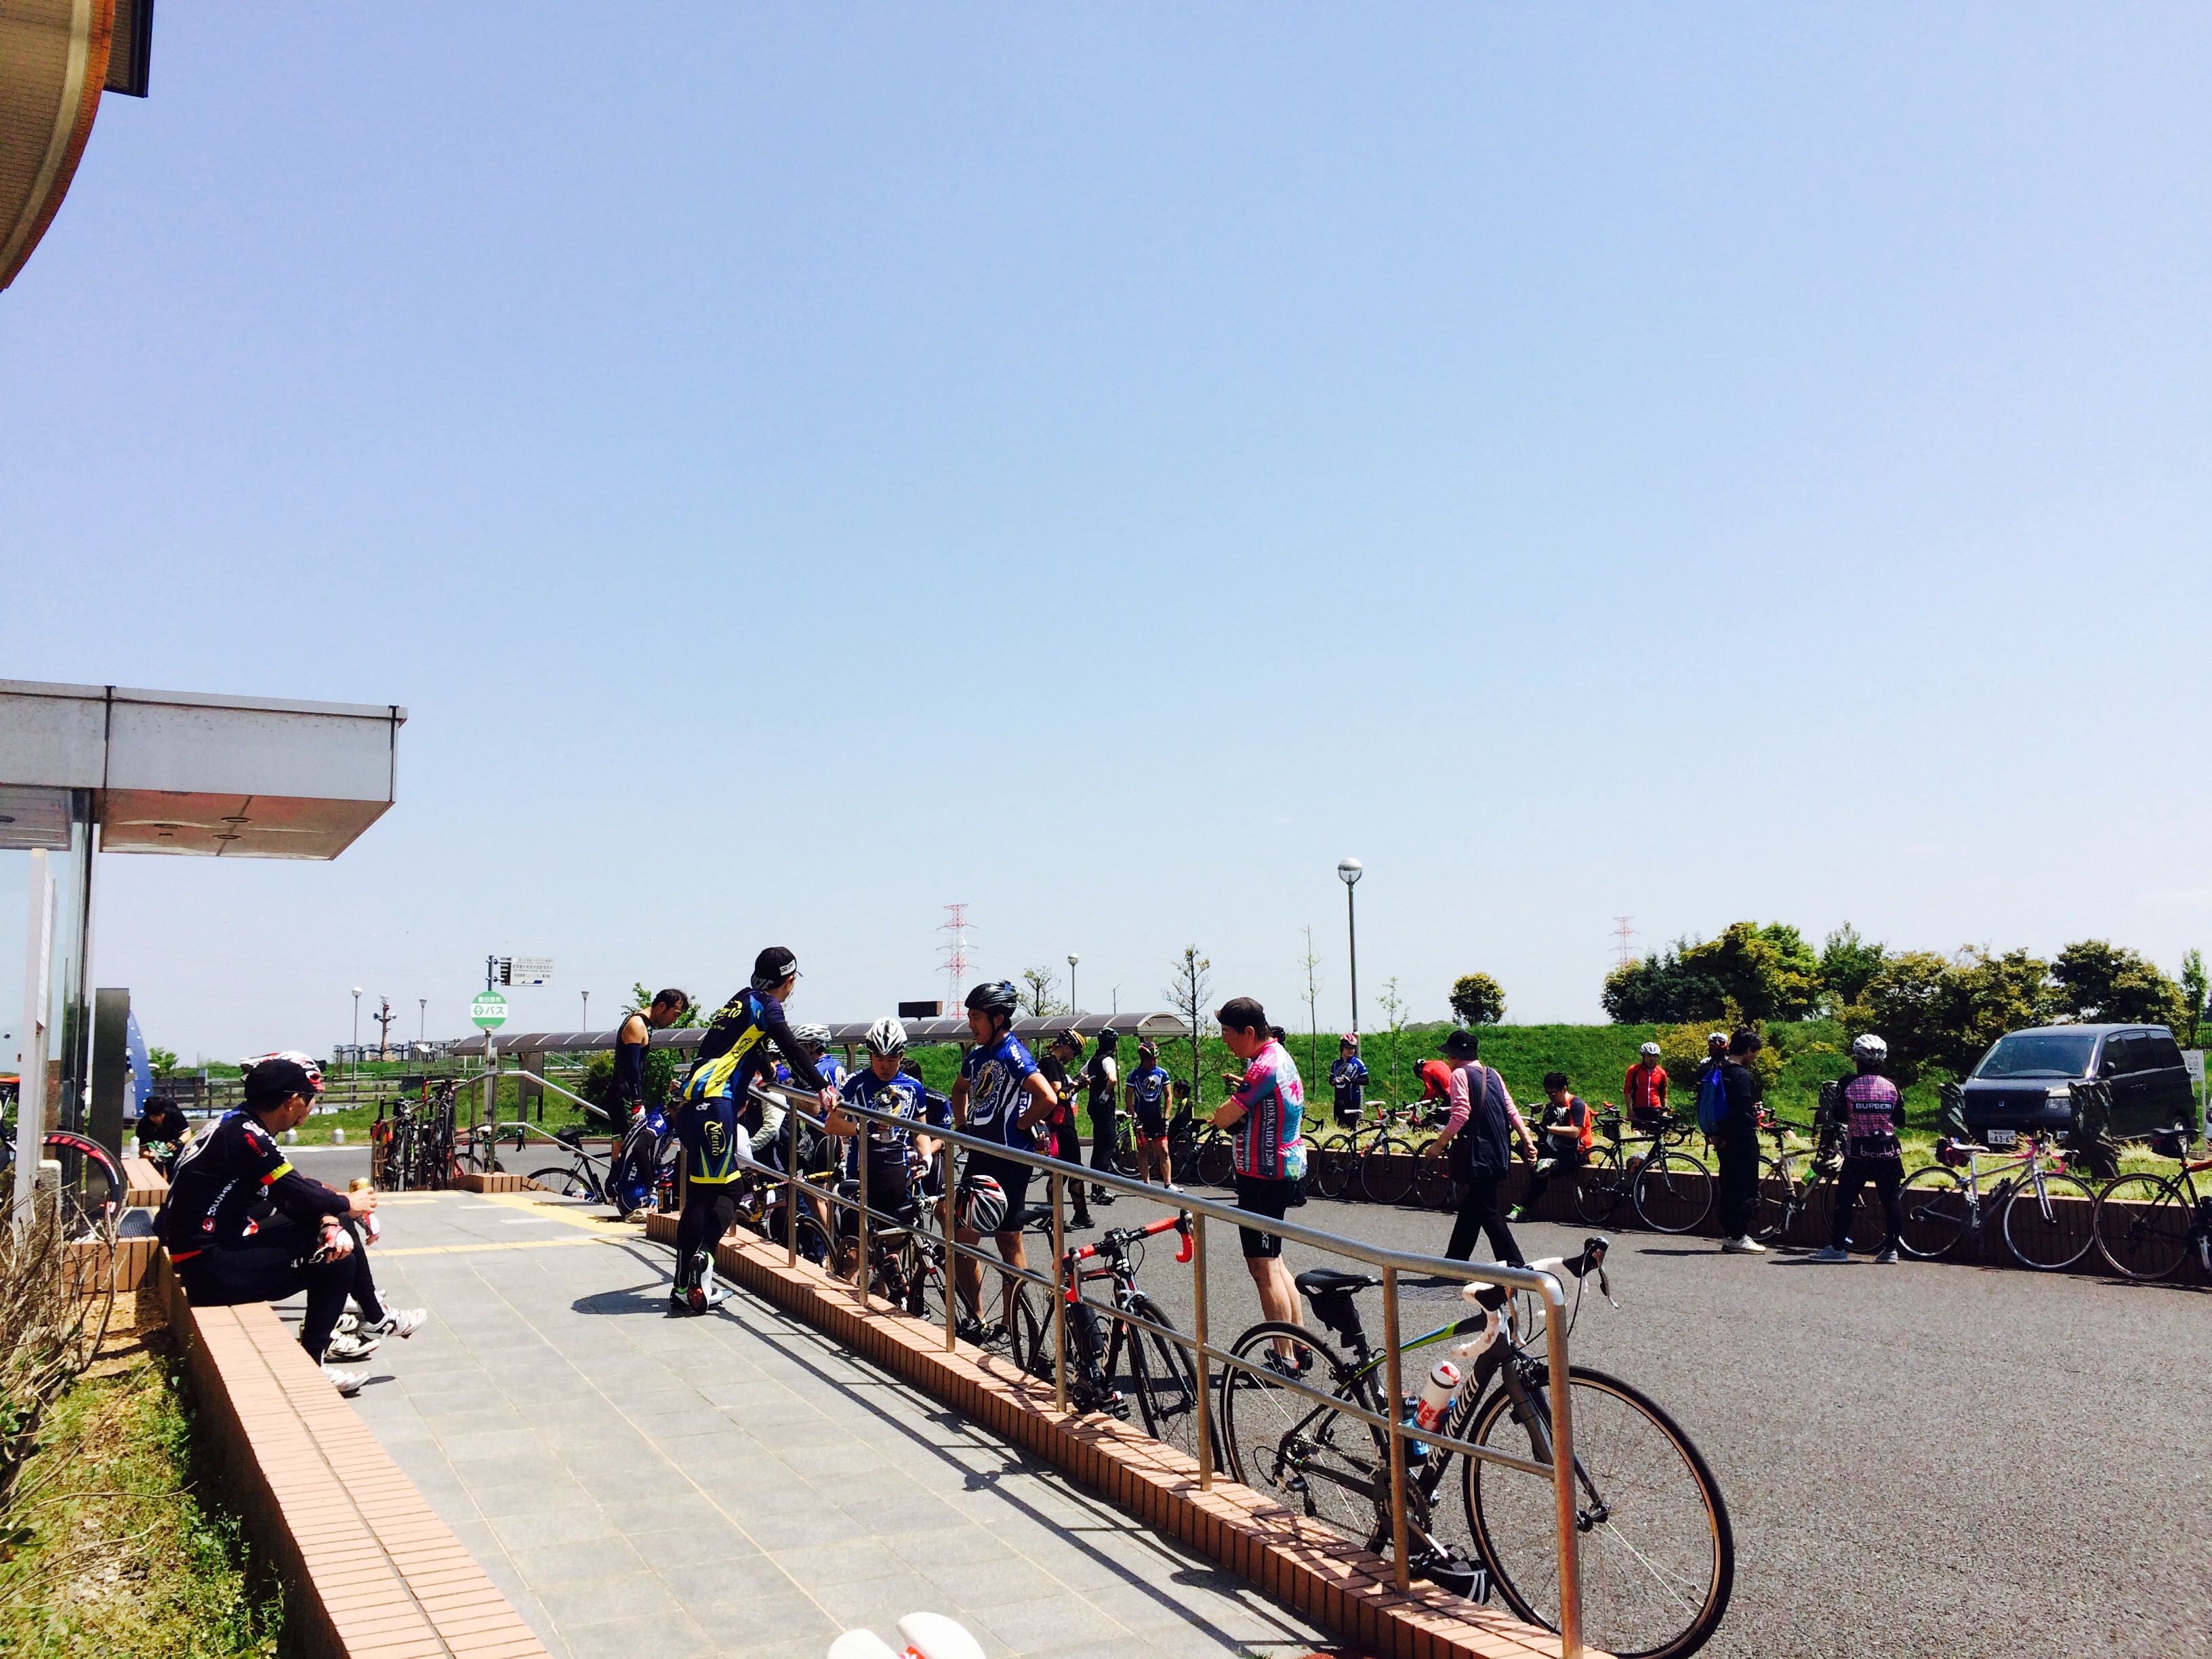 Let's ride on ٩( ᐛ )و 2015.4.26（日）サンデーライド